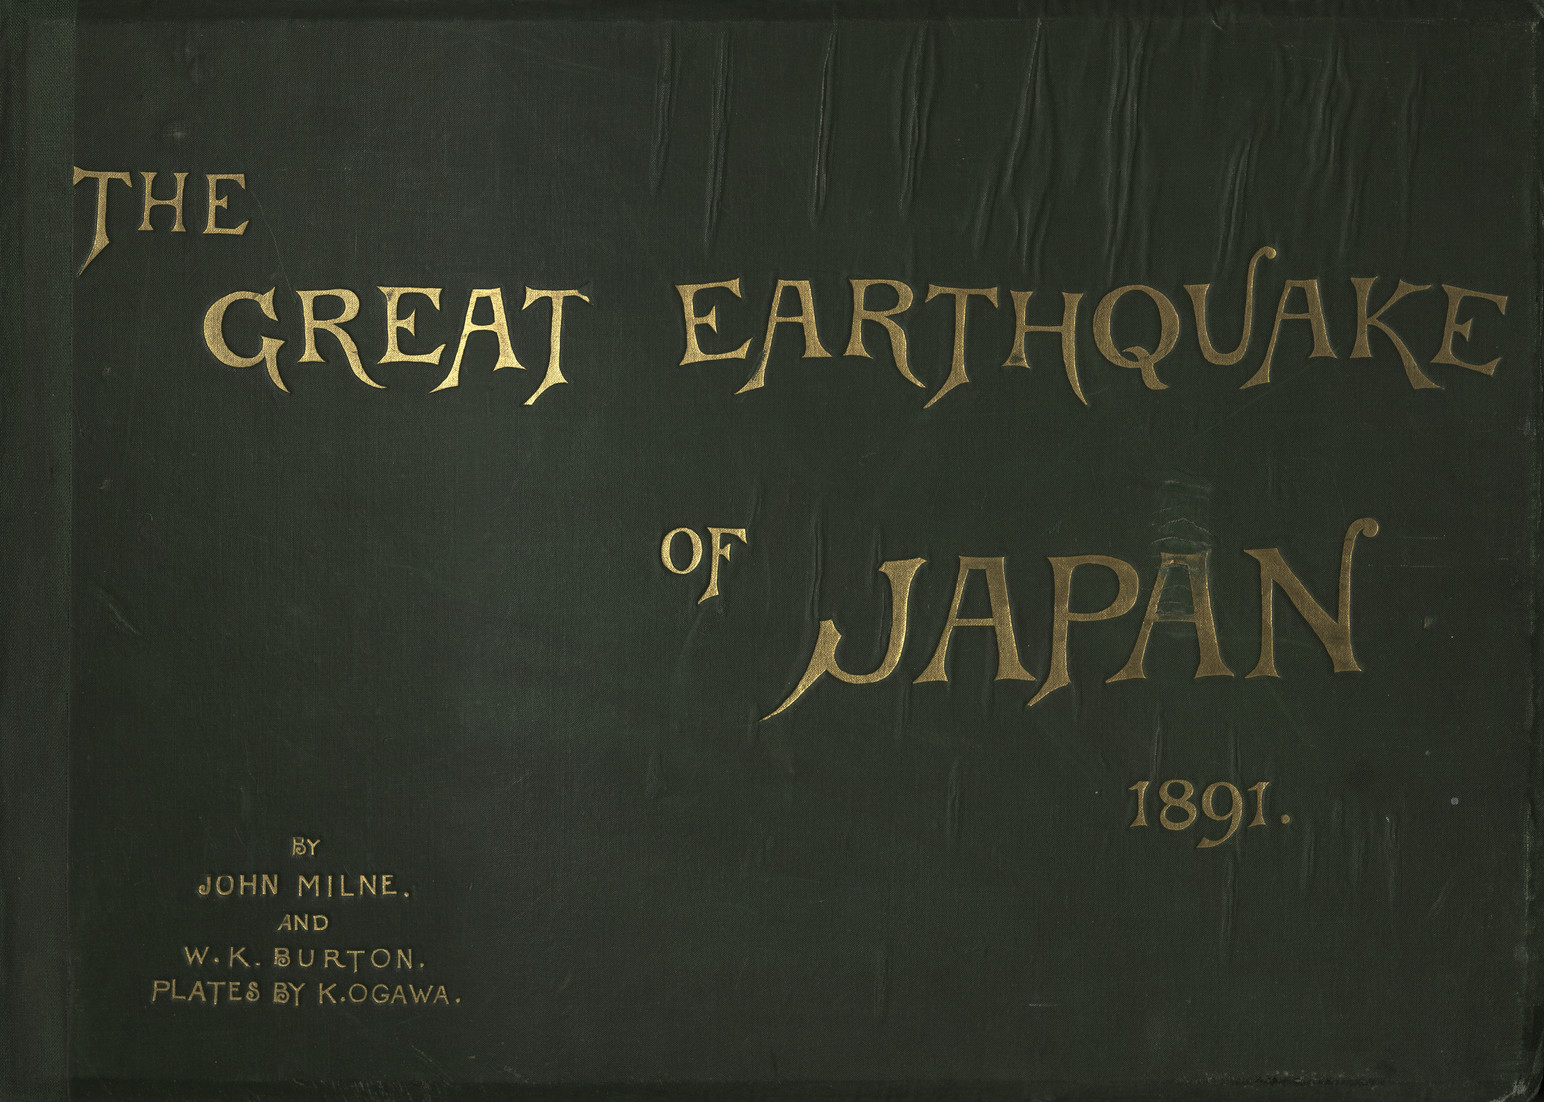 The great earthquake in Japan, 1891